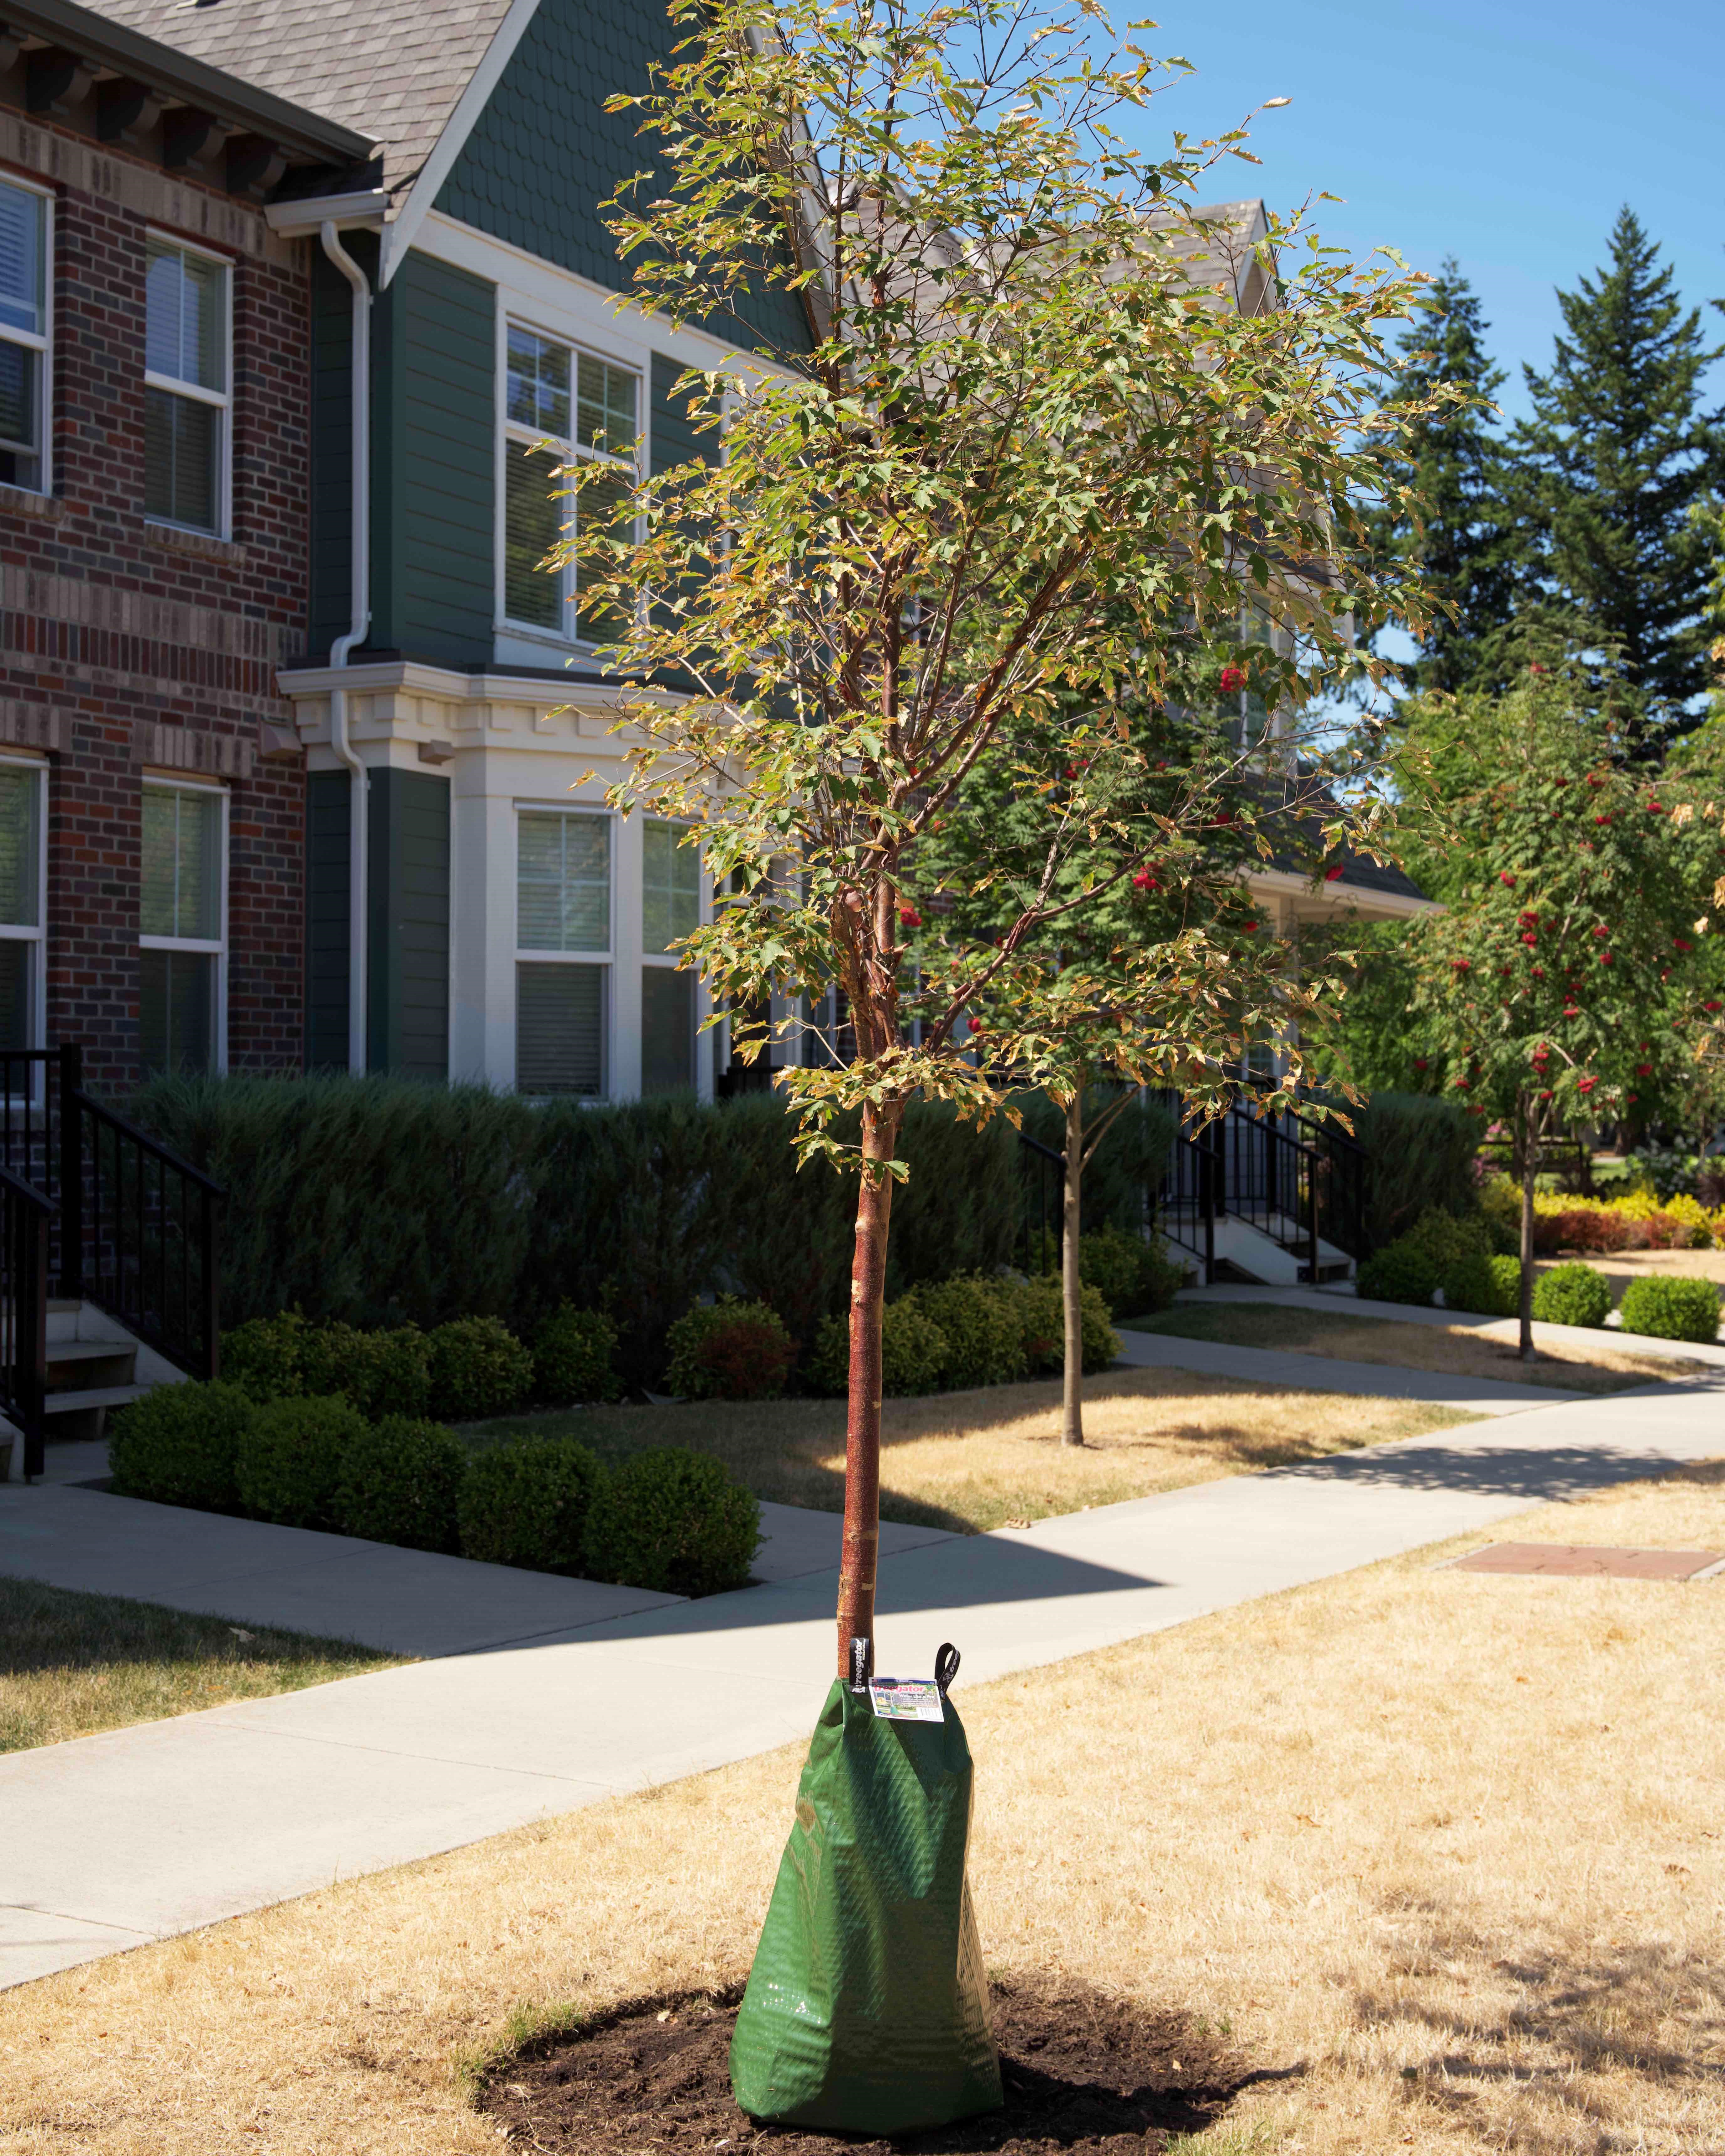 A street tree with a green water bag.